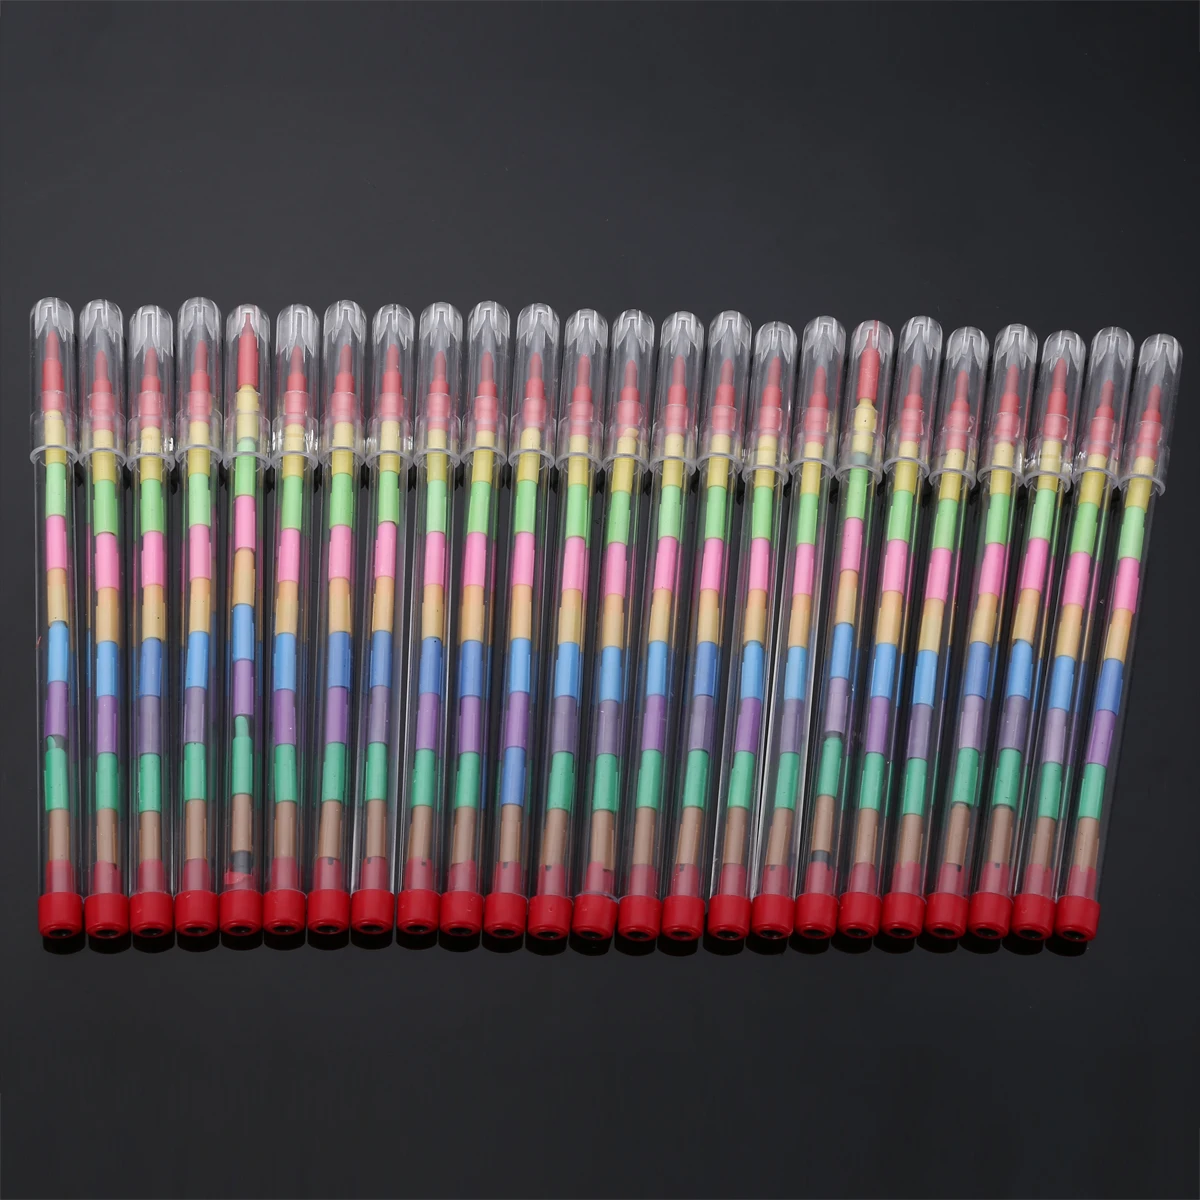 Rainbow Pencils Stackable Crayons Mini Crayons For Kids Party